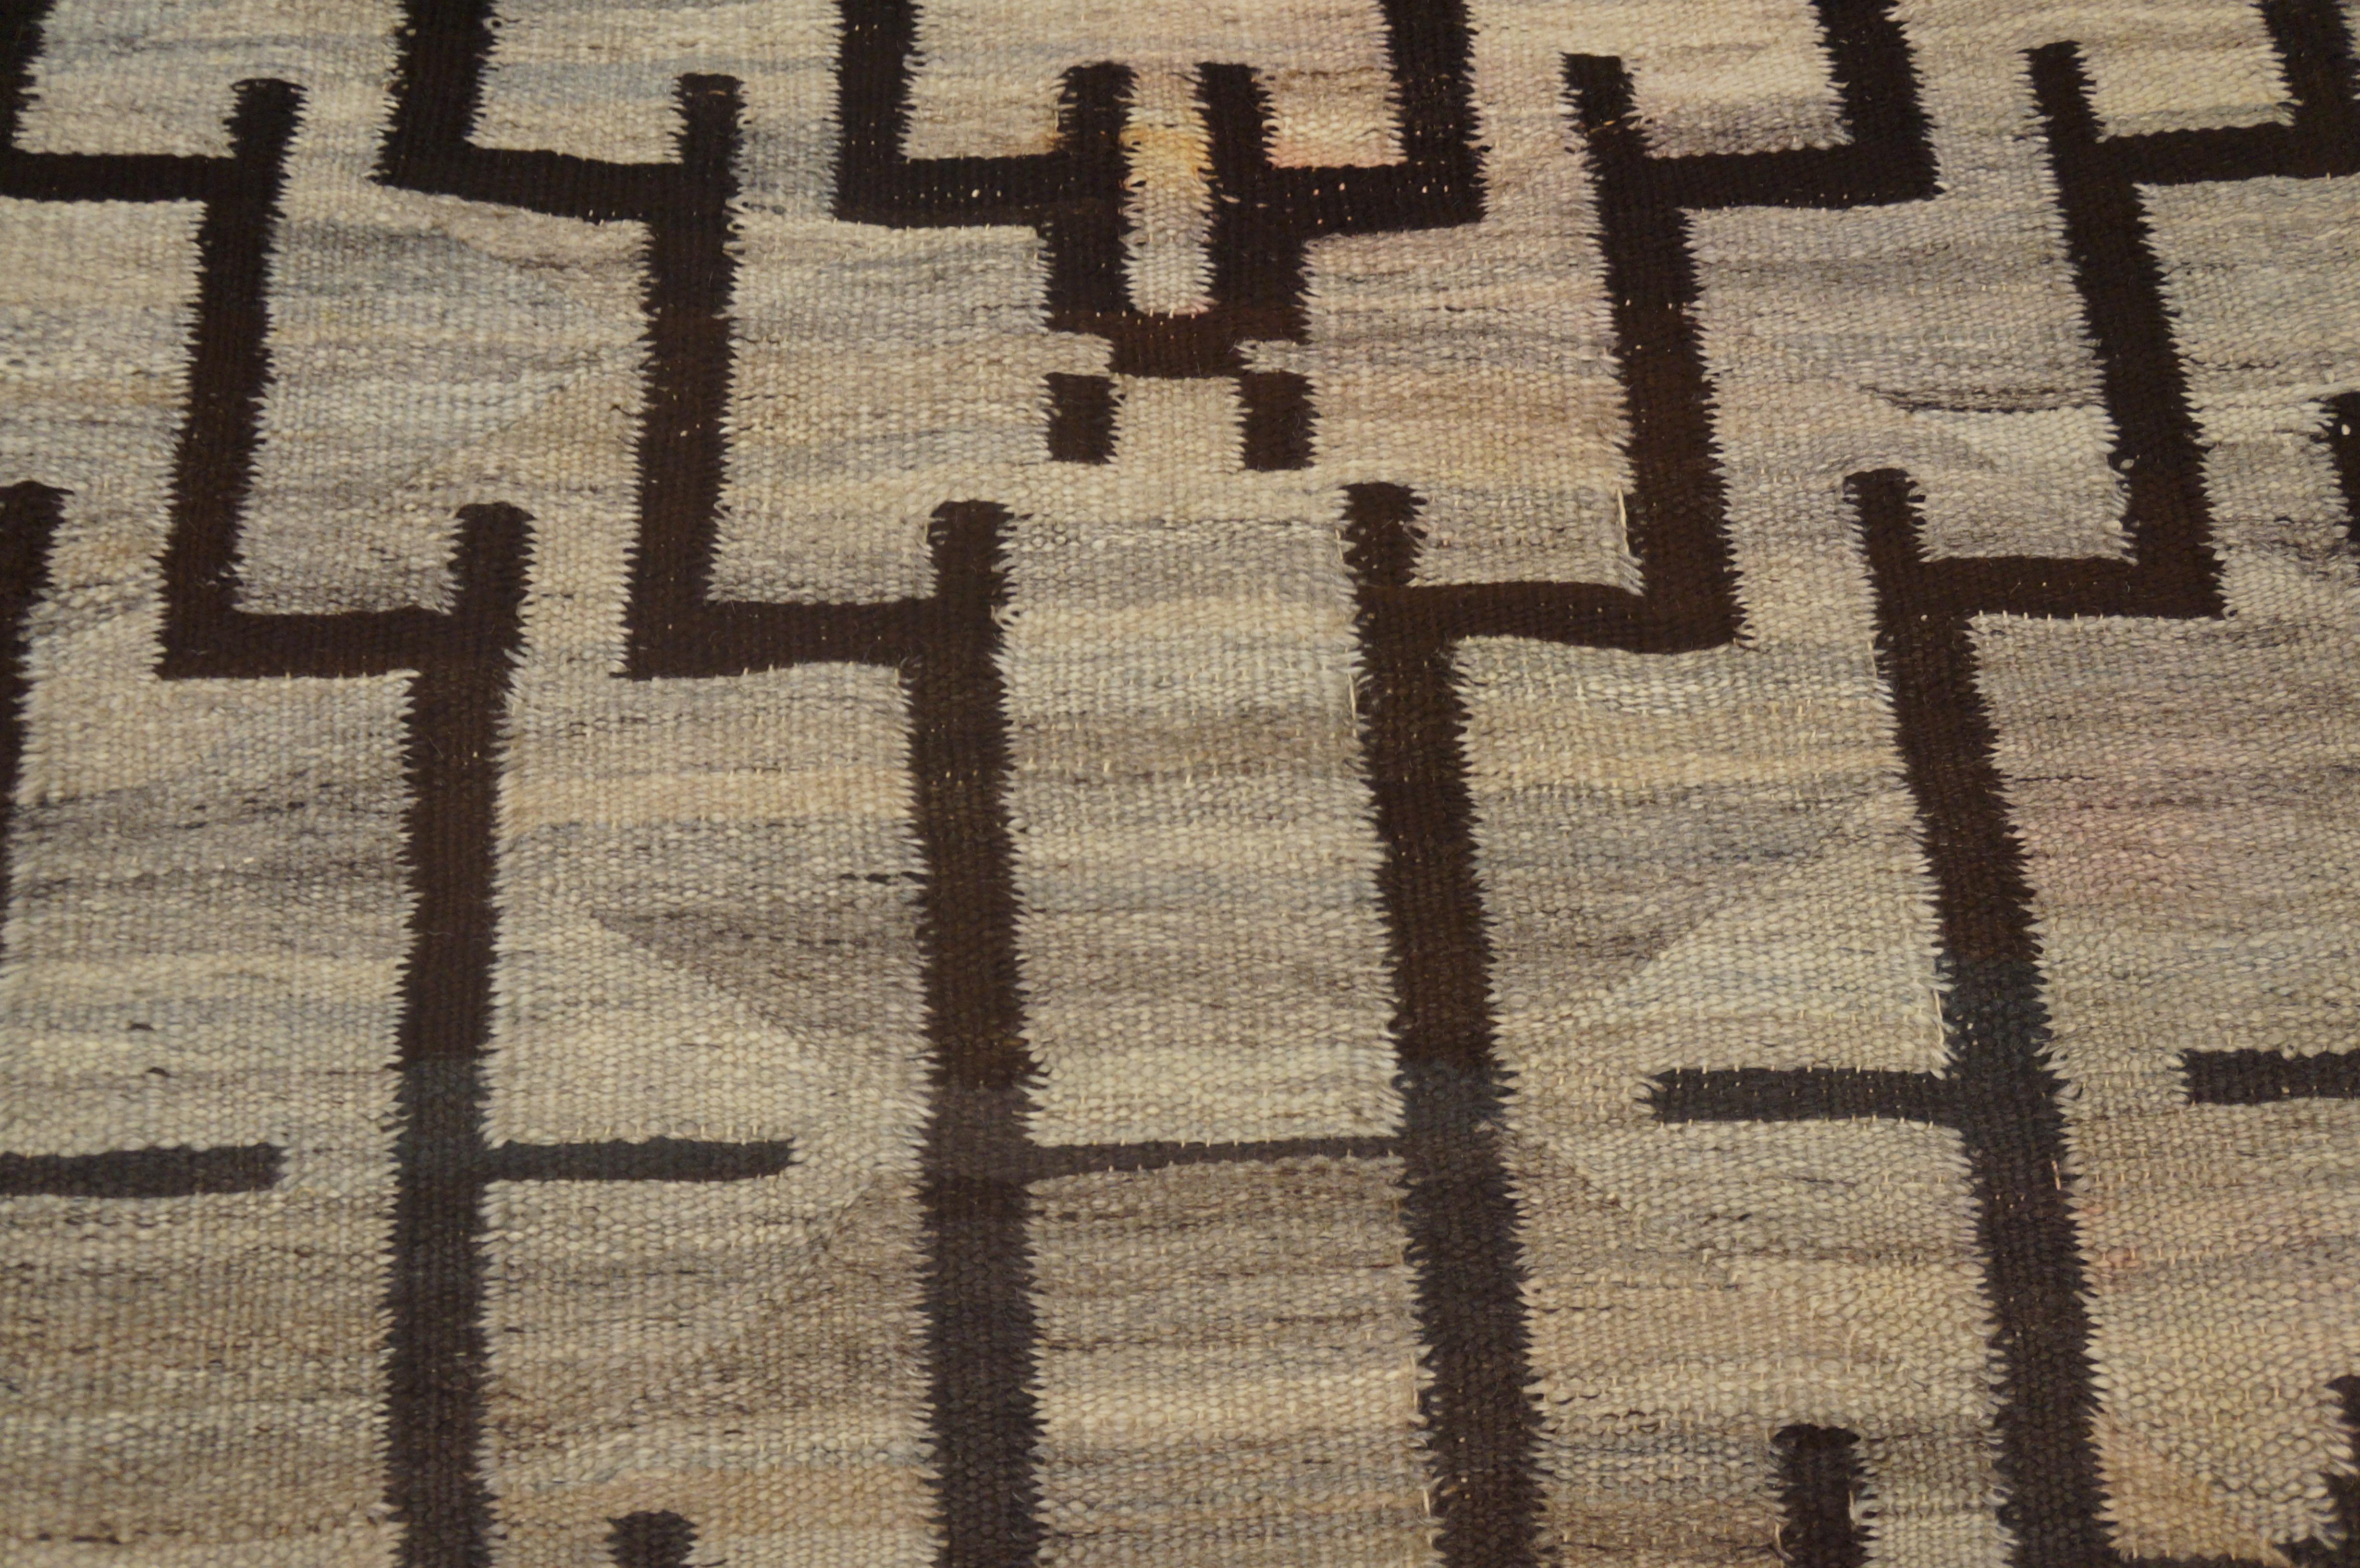 Early 20th Century American Transitional Period Navajo Carpet (4'9